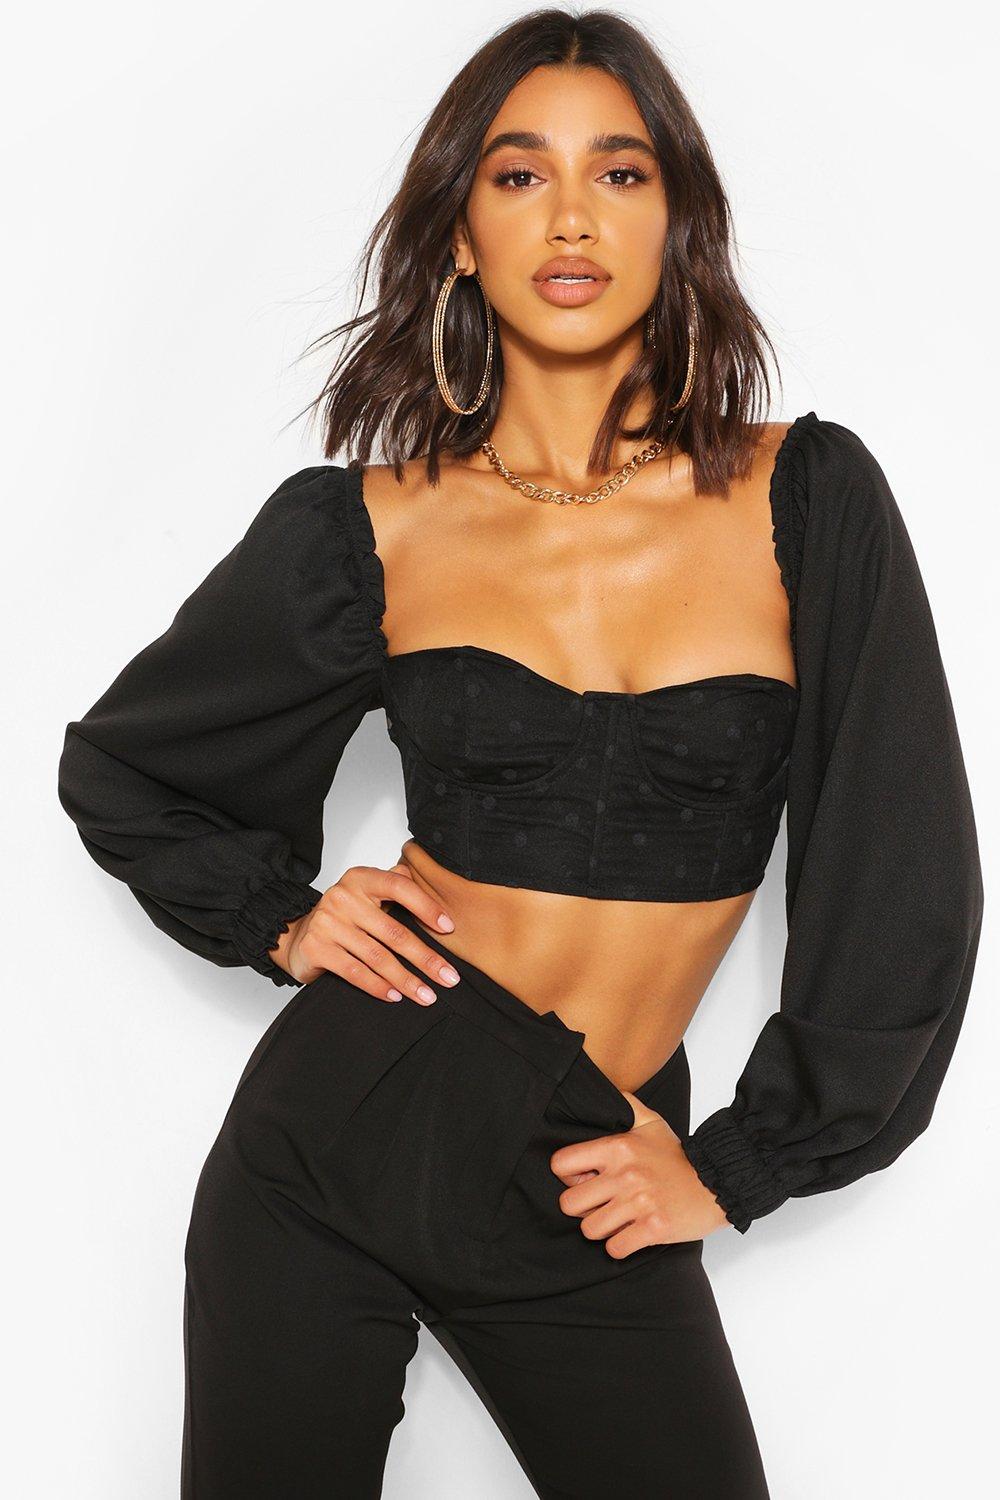 Black Corset Top Outfit Online